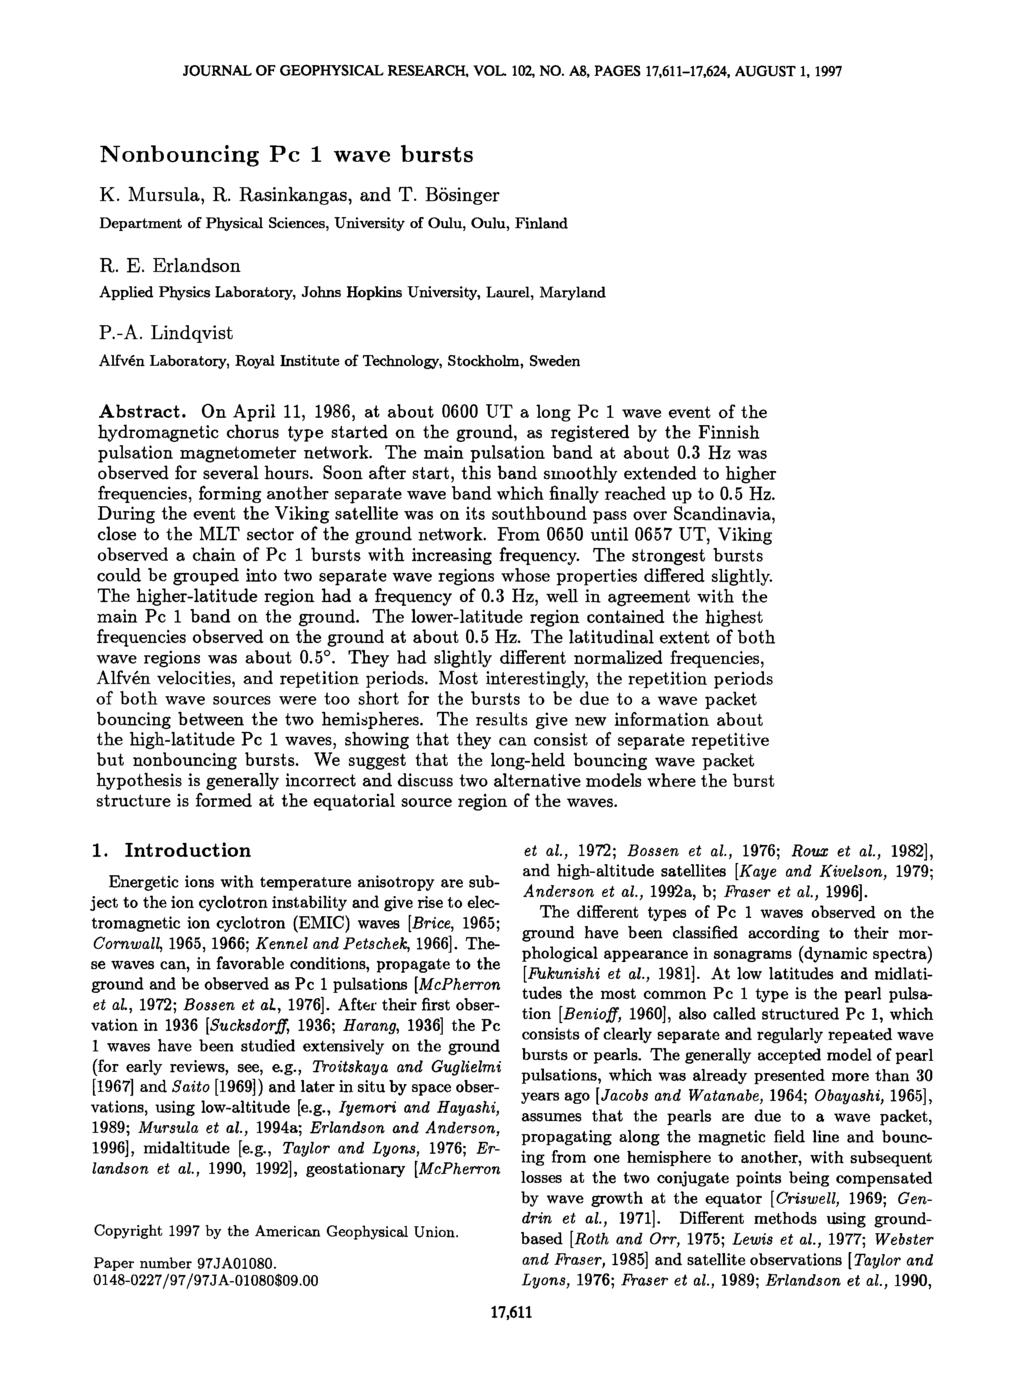 JOURNAL OF GEOPHYSICAL RESEARCH, VOL. 102, NO. A8, PAGES 17,611-17,624, AUGUST 1, 1997 Nonbouncing Pc 1 wave bursts K. Mursula, R. Rasinkangas, and T.